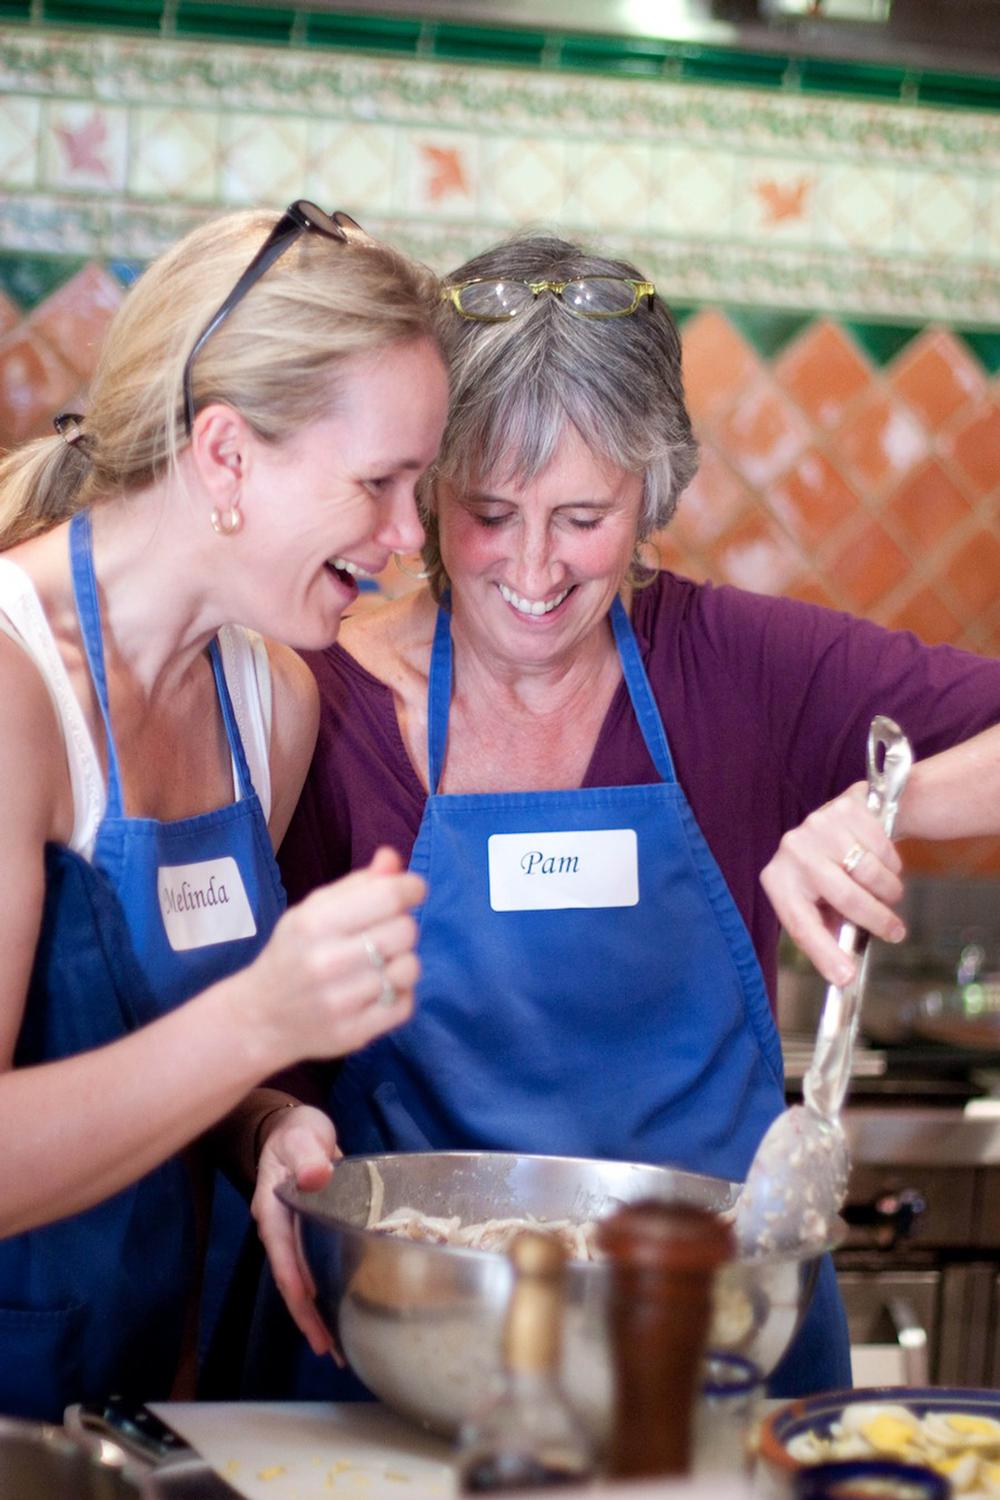 Guests can take classes at the cookery school with executive chef Denise Roa